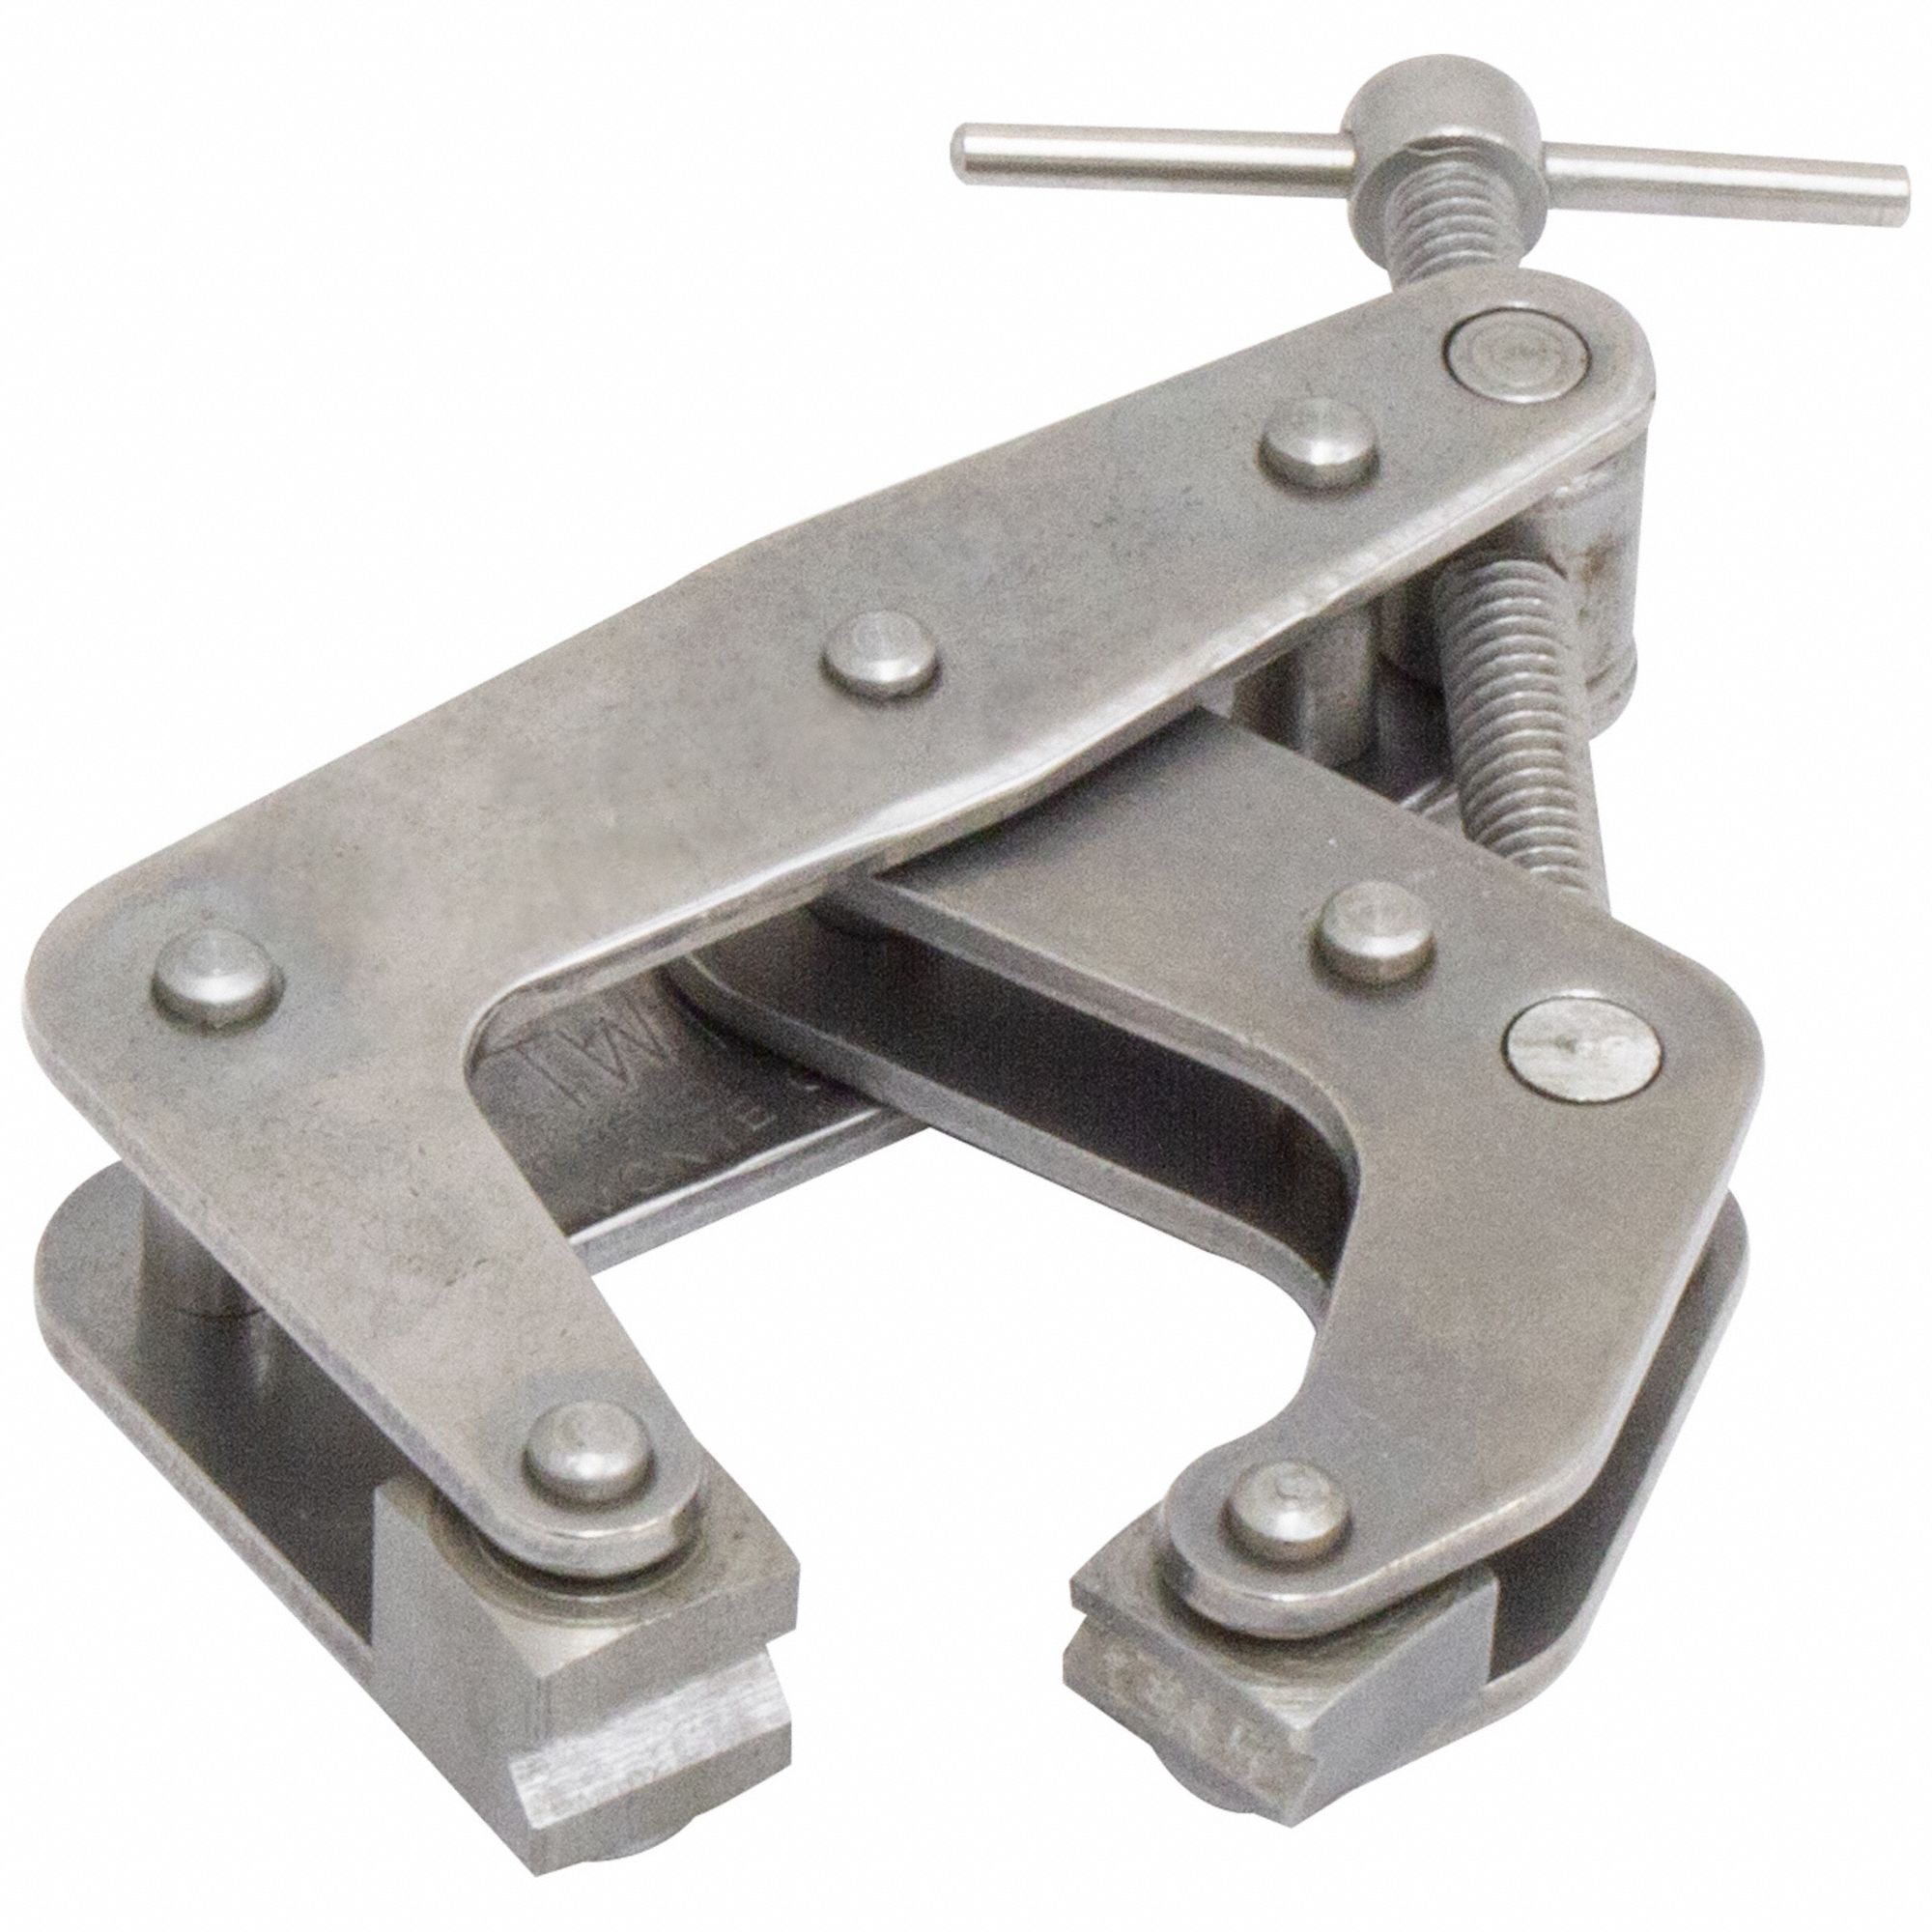 Cantilever Clamp: 2 in Max. Opening, 1 1/4 in Throat Dp, Tumbled, Stainless Steel